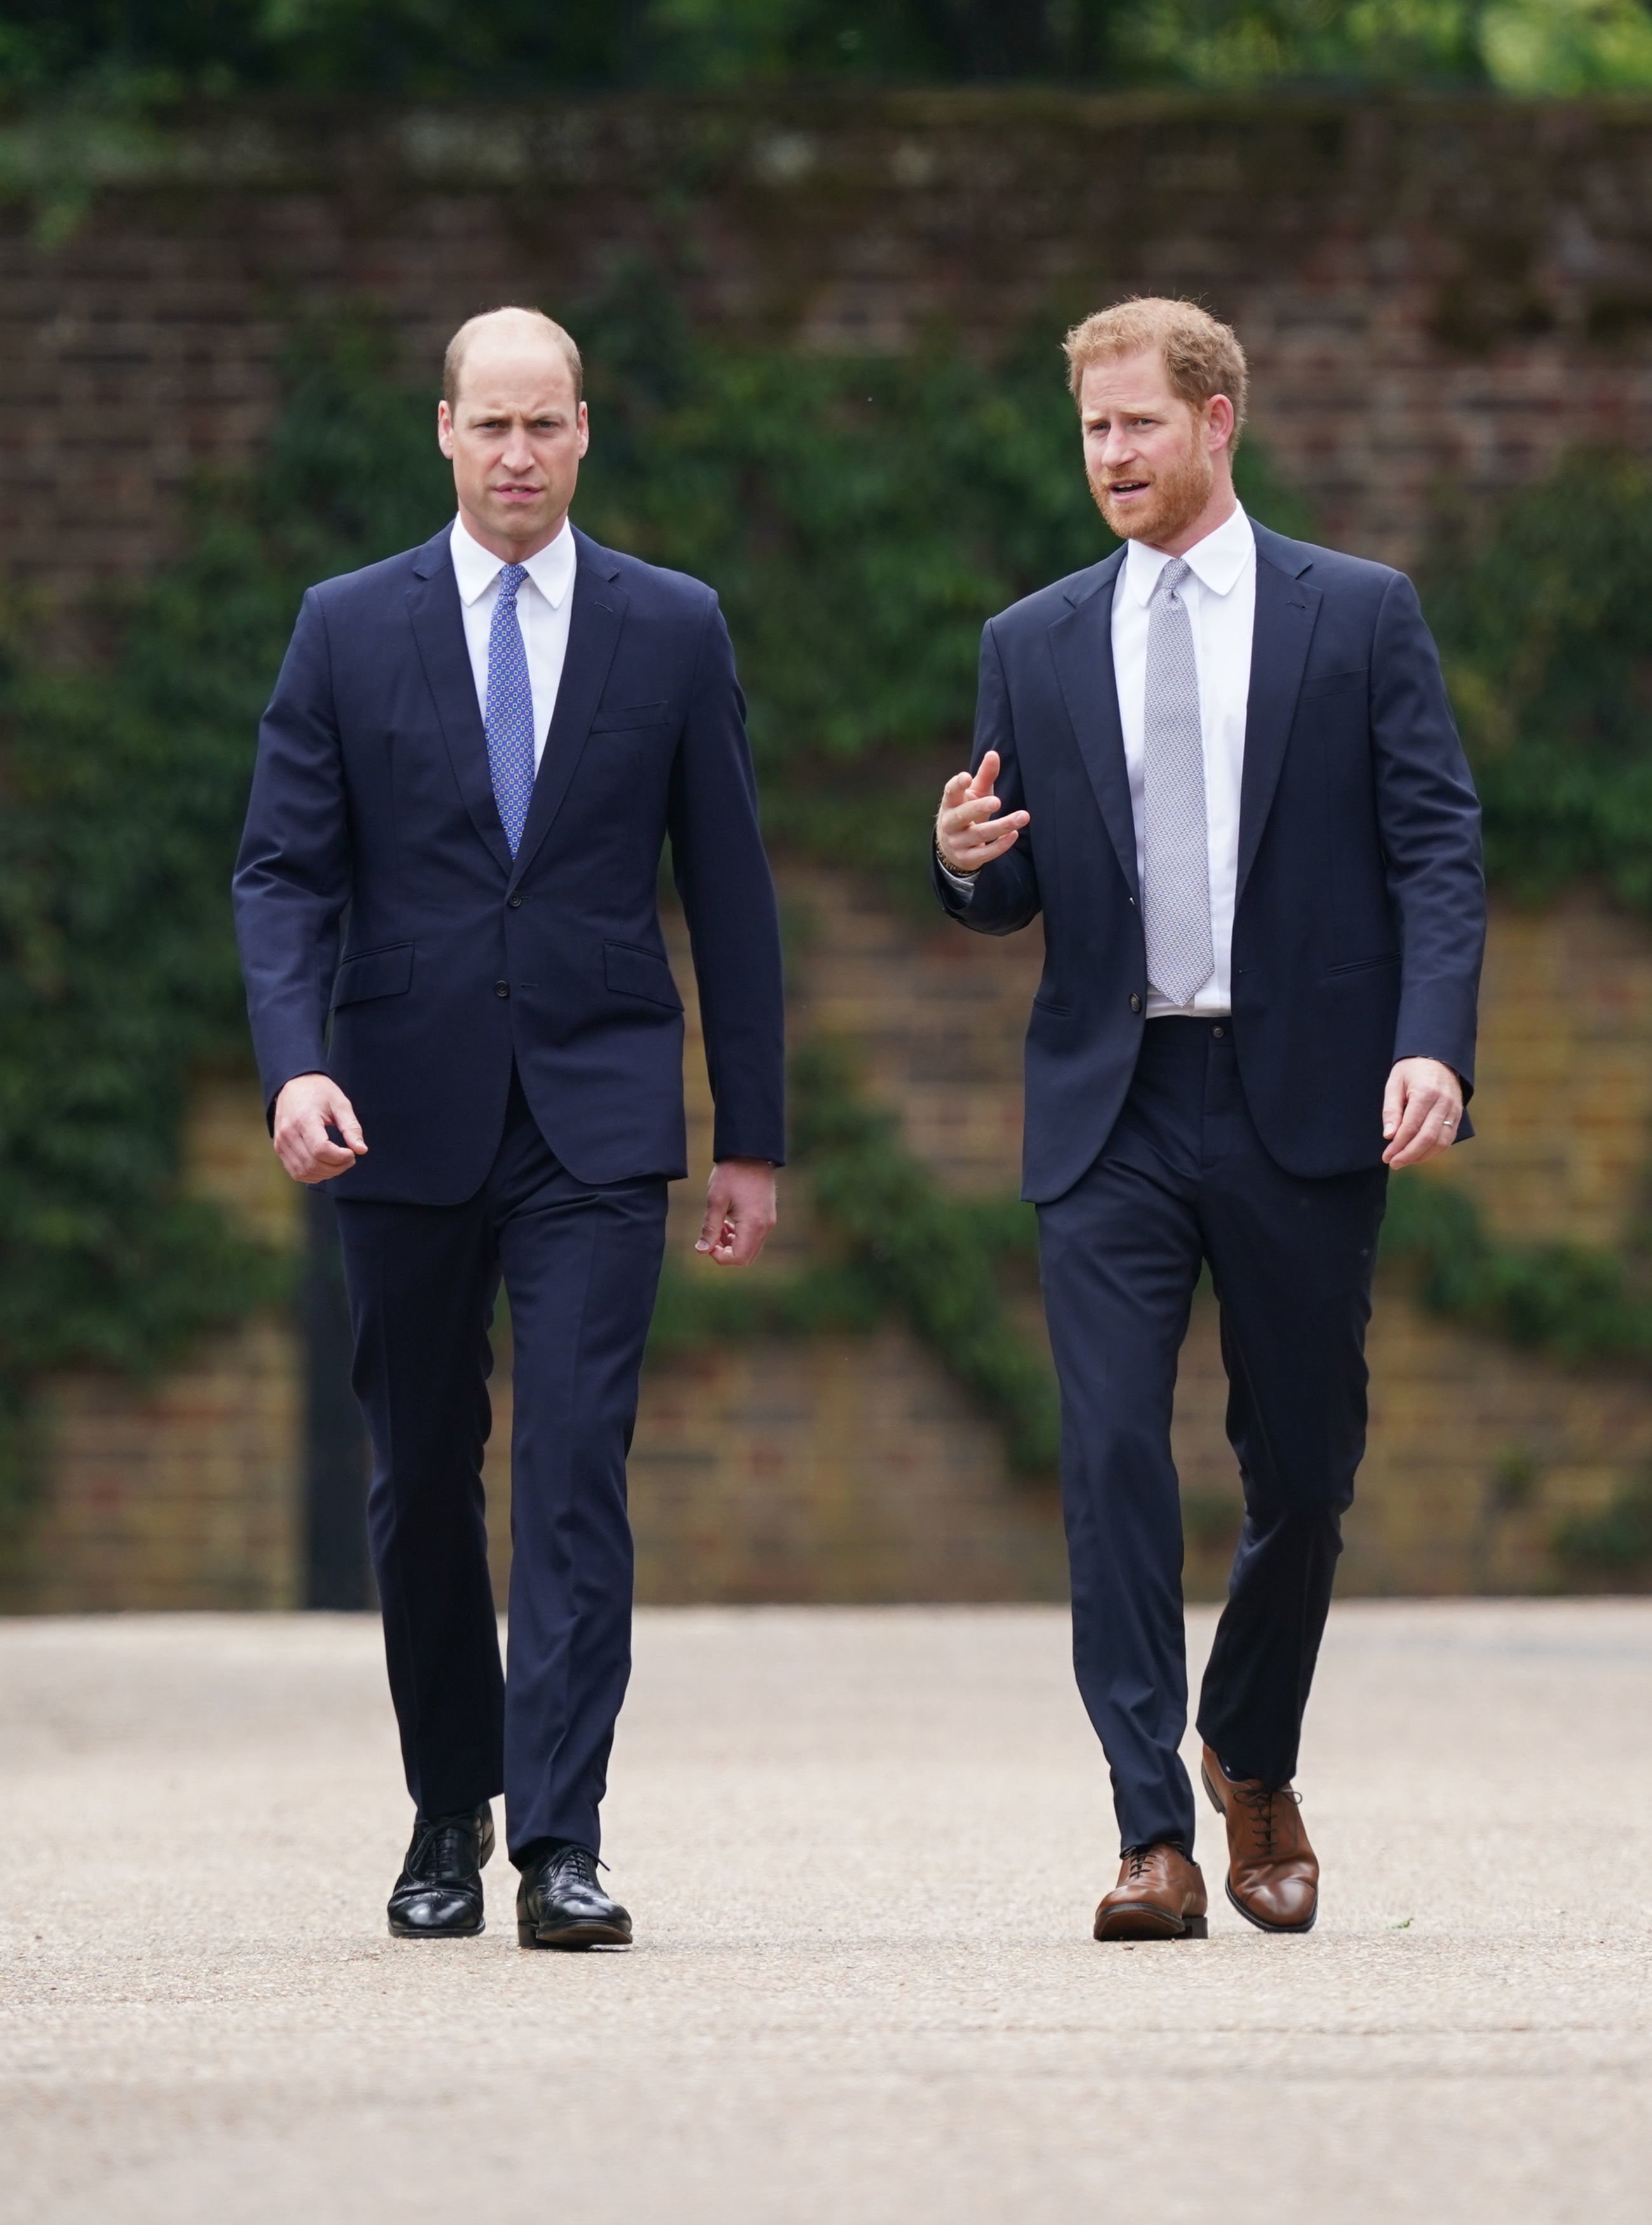 Prince Harry and Prince William in London 2021. | Source: Getty Images